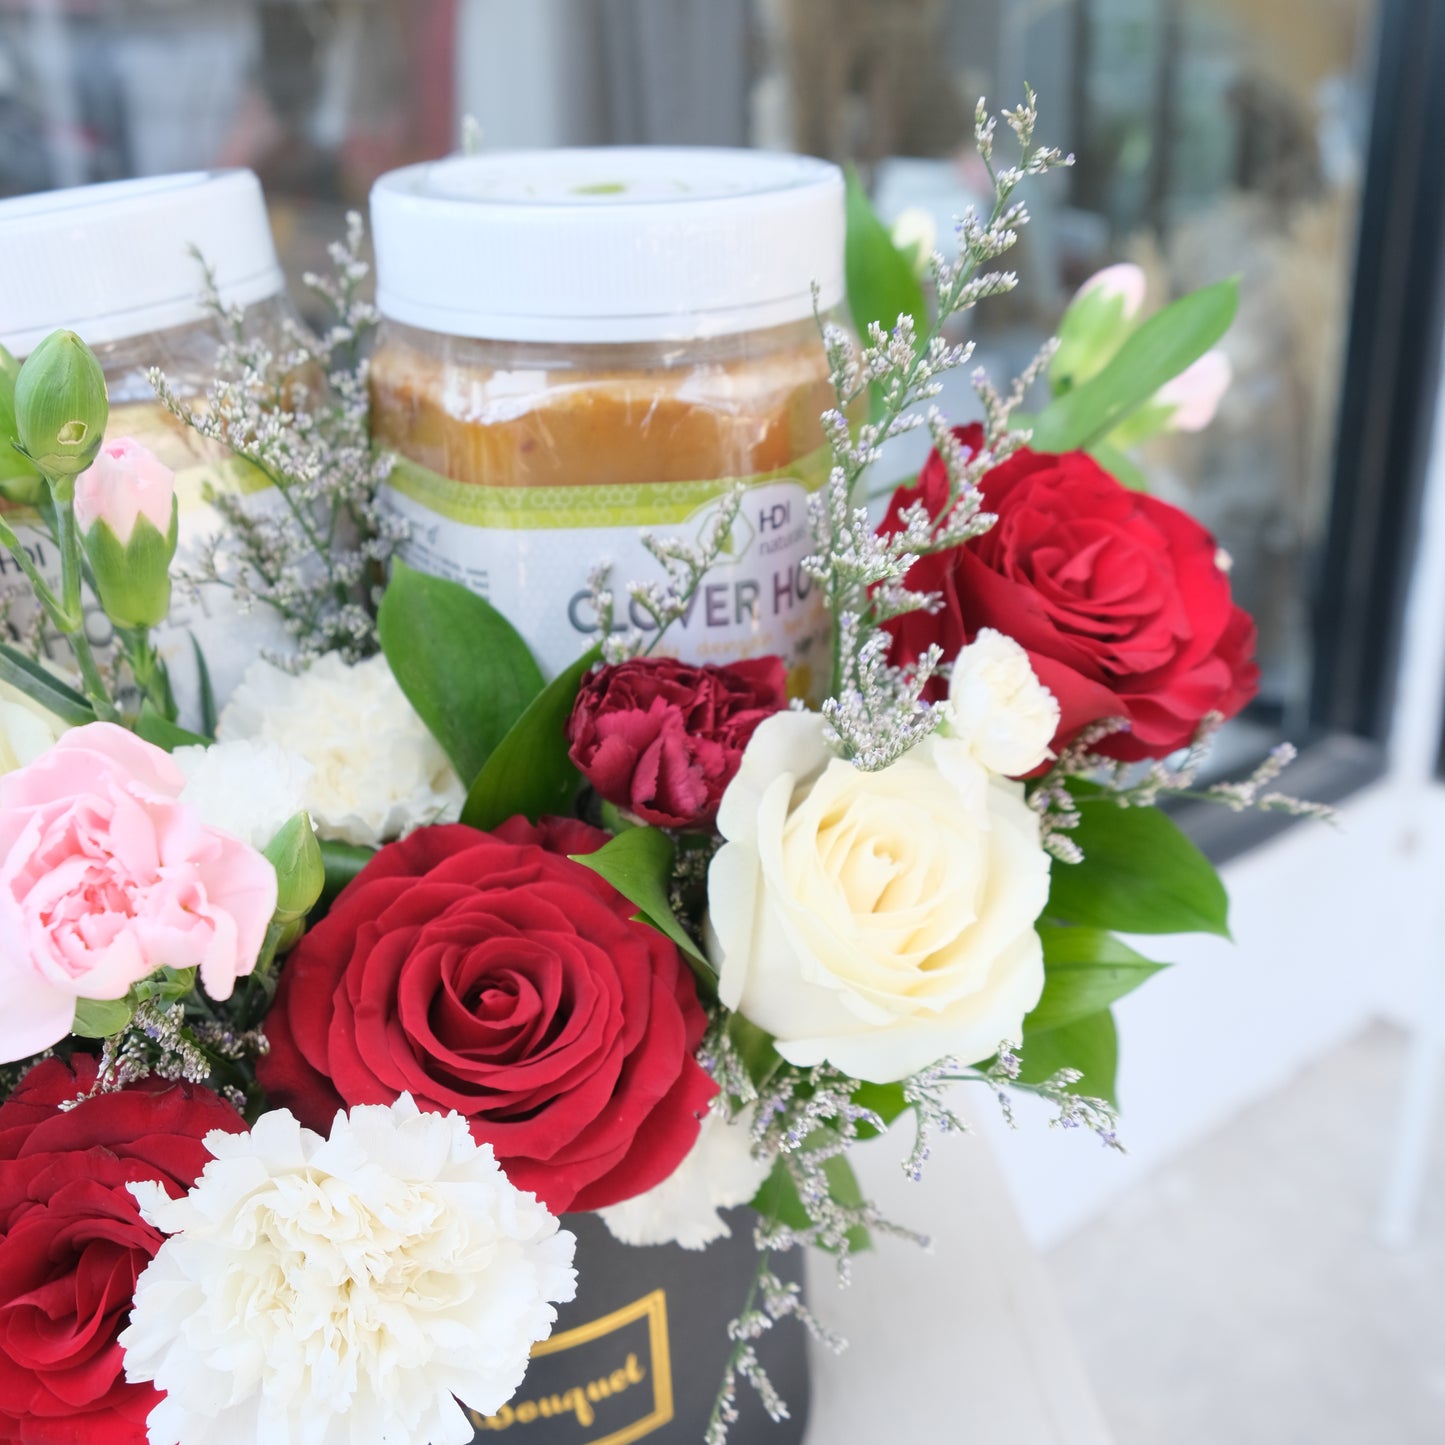 Honey and Flowers Set Get Well Soon Hamper Gift